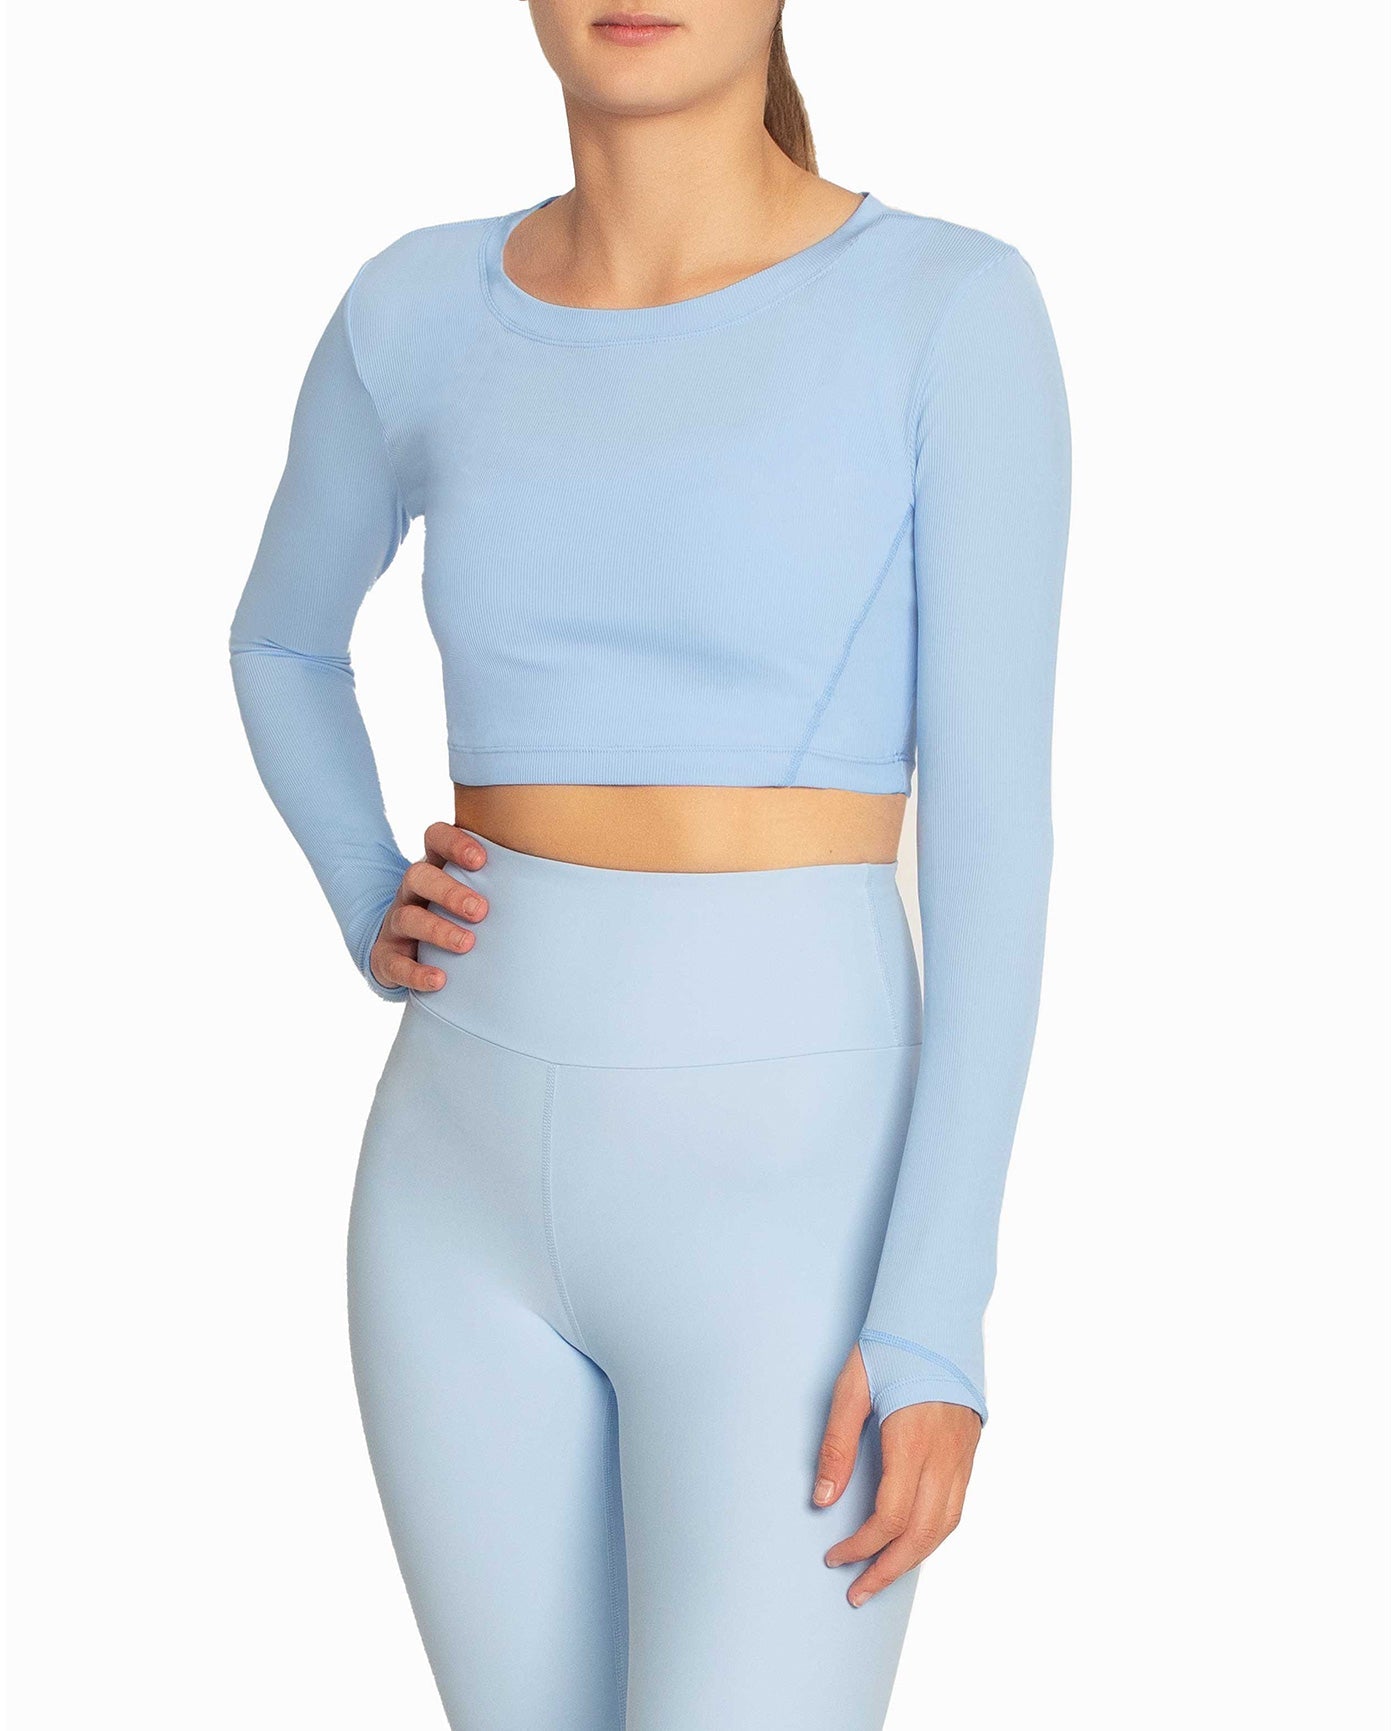 SIDE OF CROPPED ACTIVE LONG SLEEVE TOP | WINDSURFER